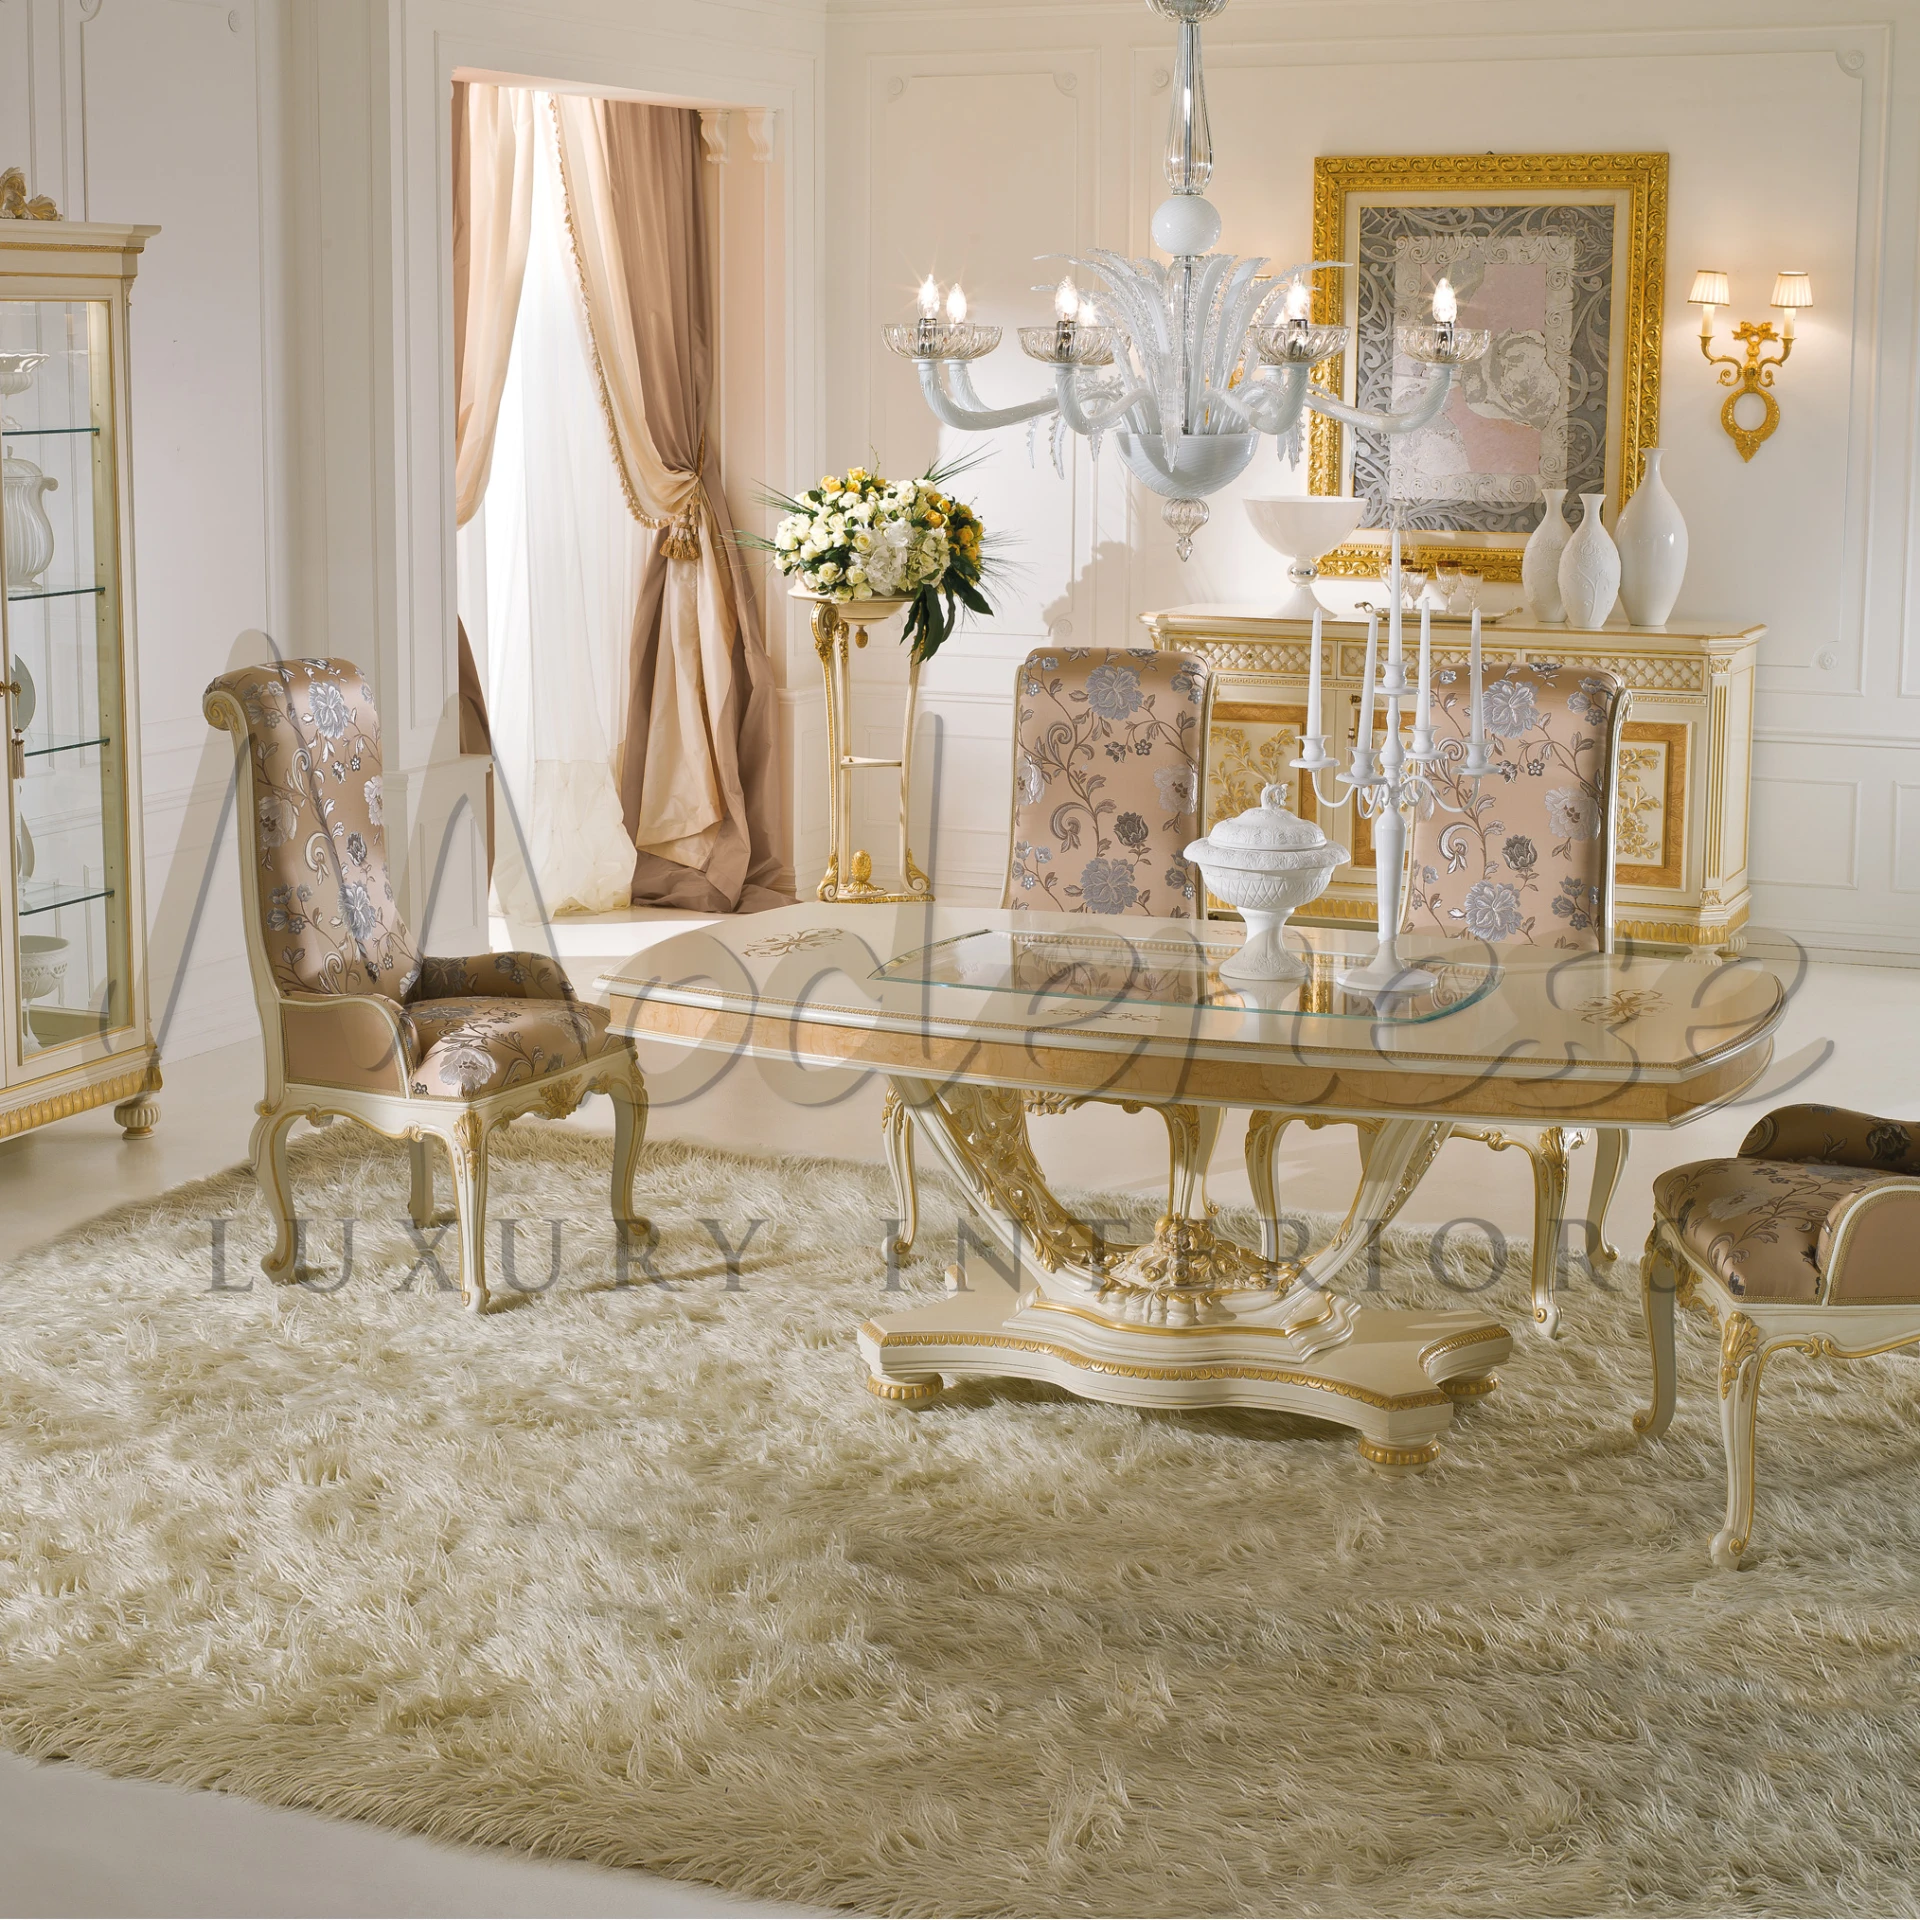 Luxurious dining room with stylish furniture and a crystal chandelier.